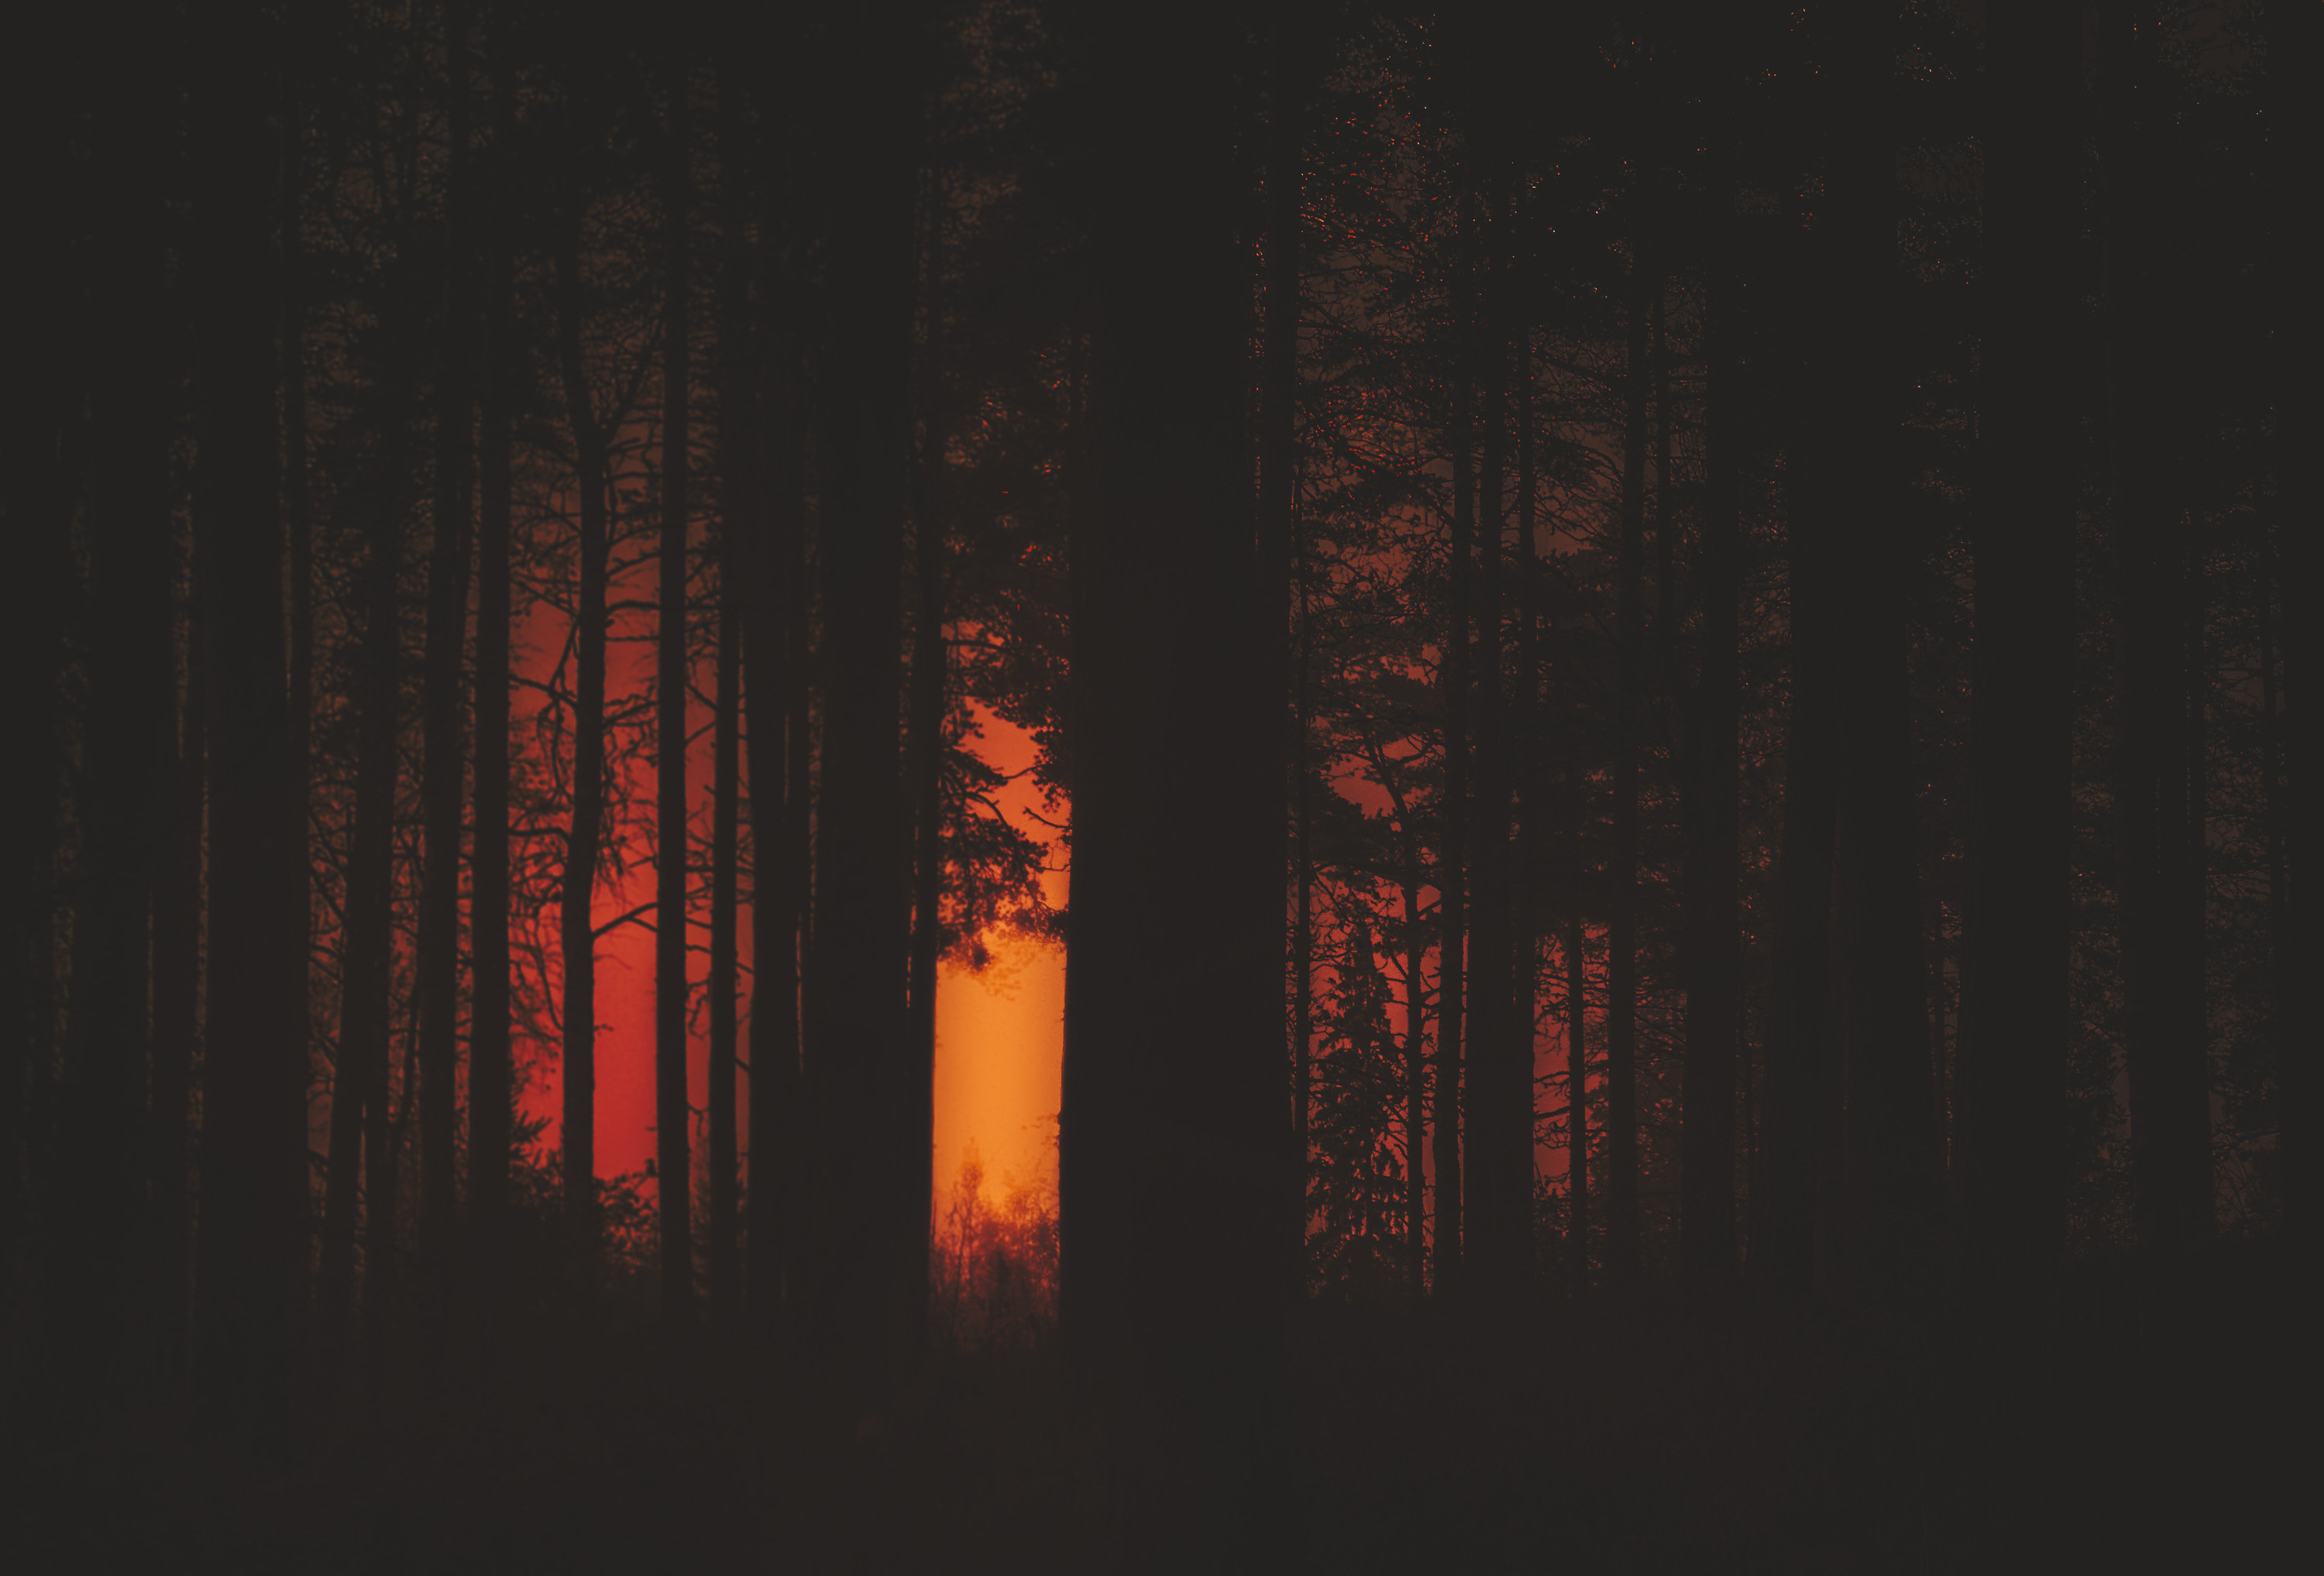 The woods at twilight